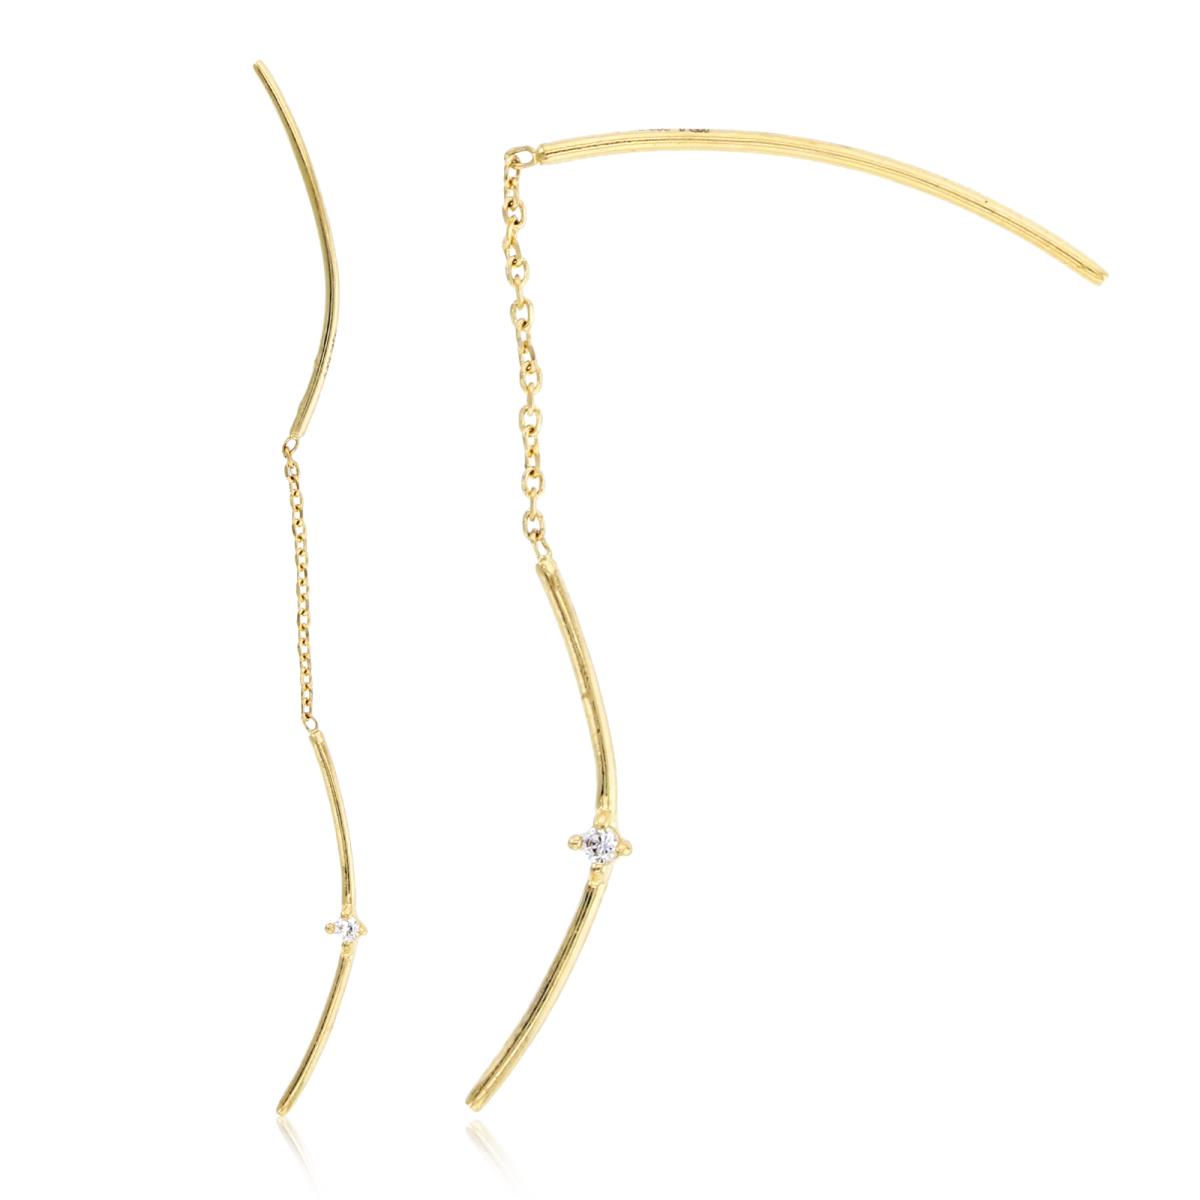 14K Yellow Gold Rnd CZ Tubes Double Sided Earrings